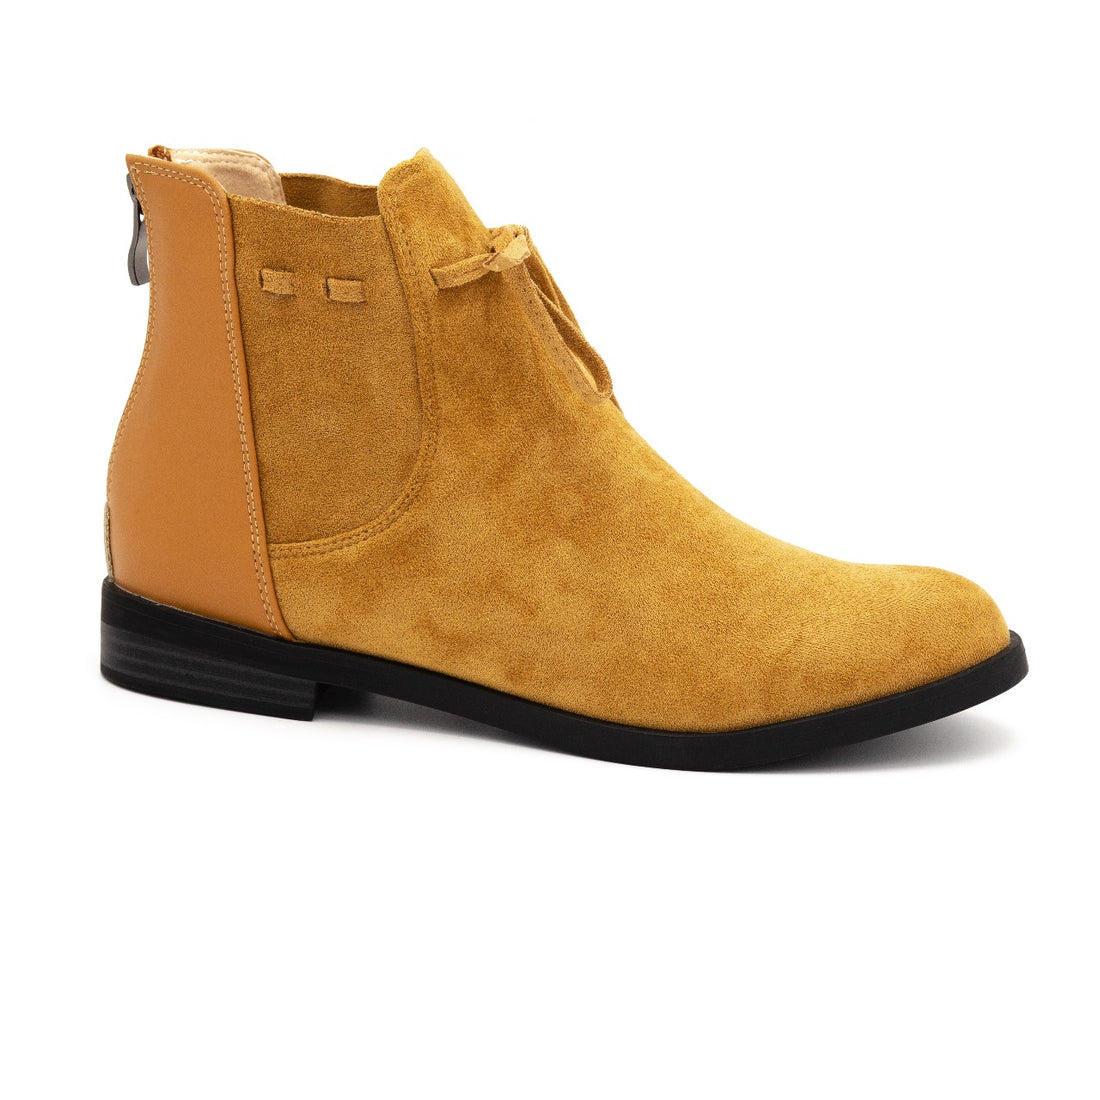 Sanday -1 ankle boot